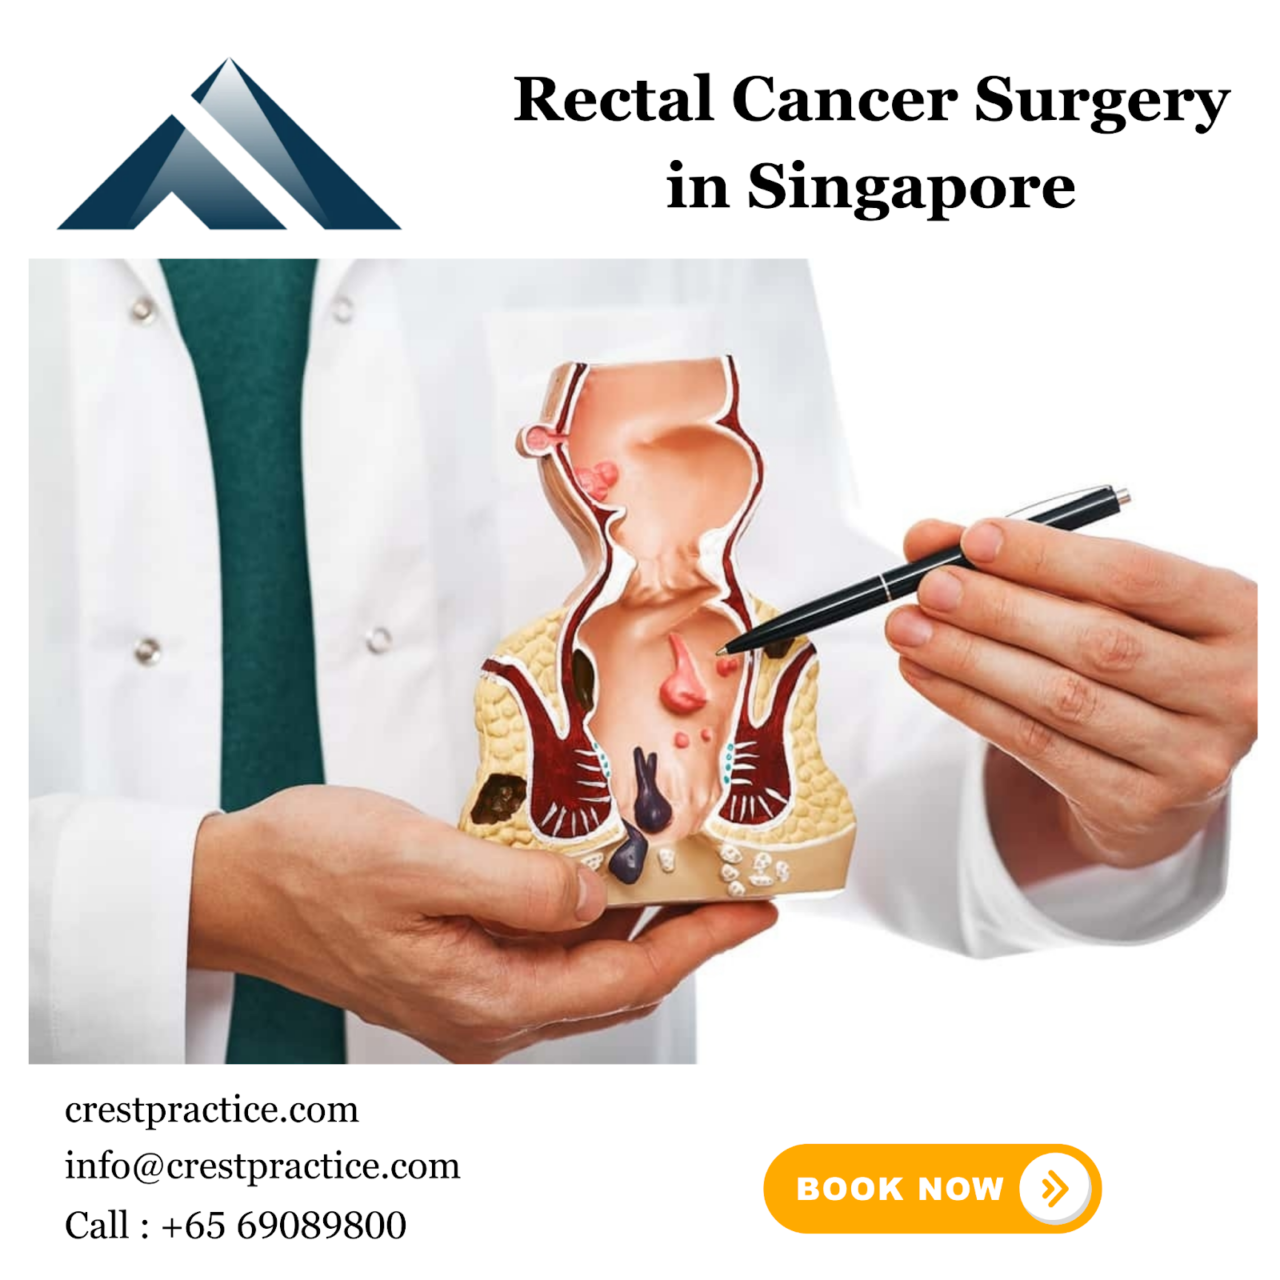 Rectal Cancer Surgery in Singapore